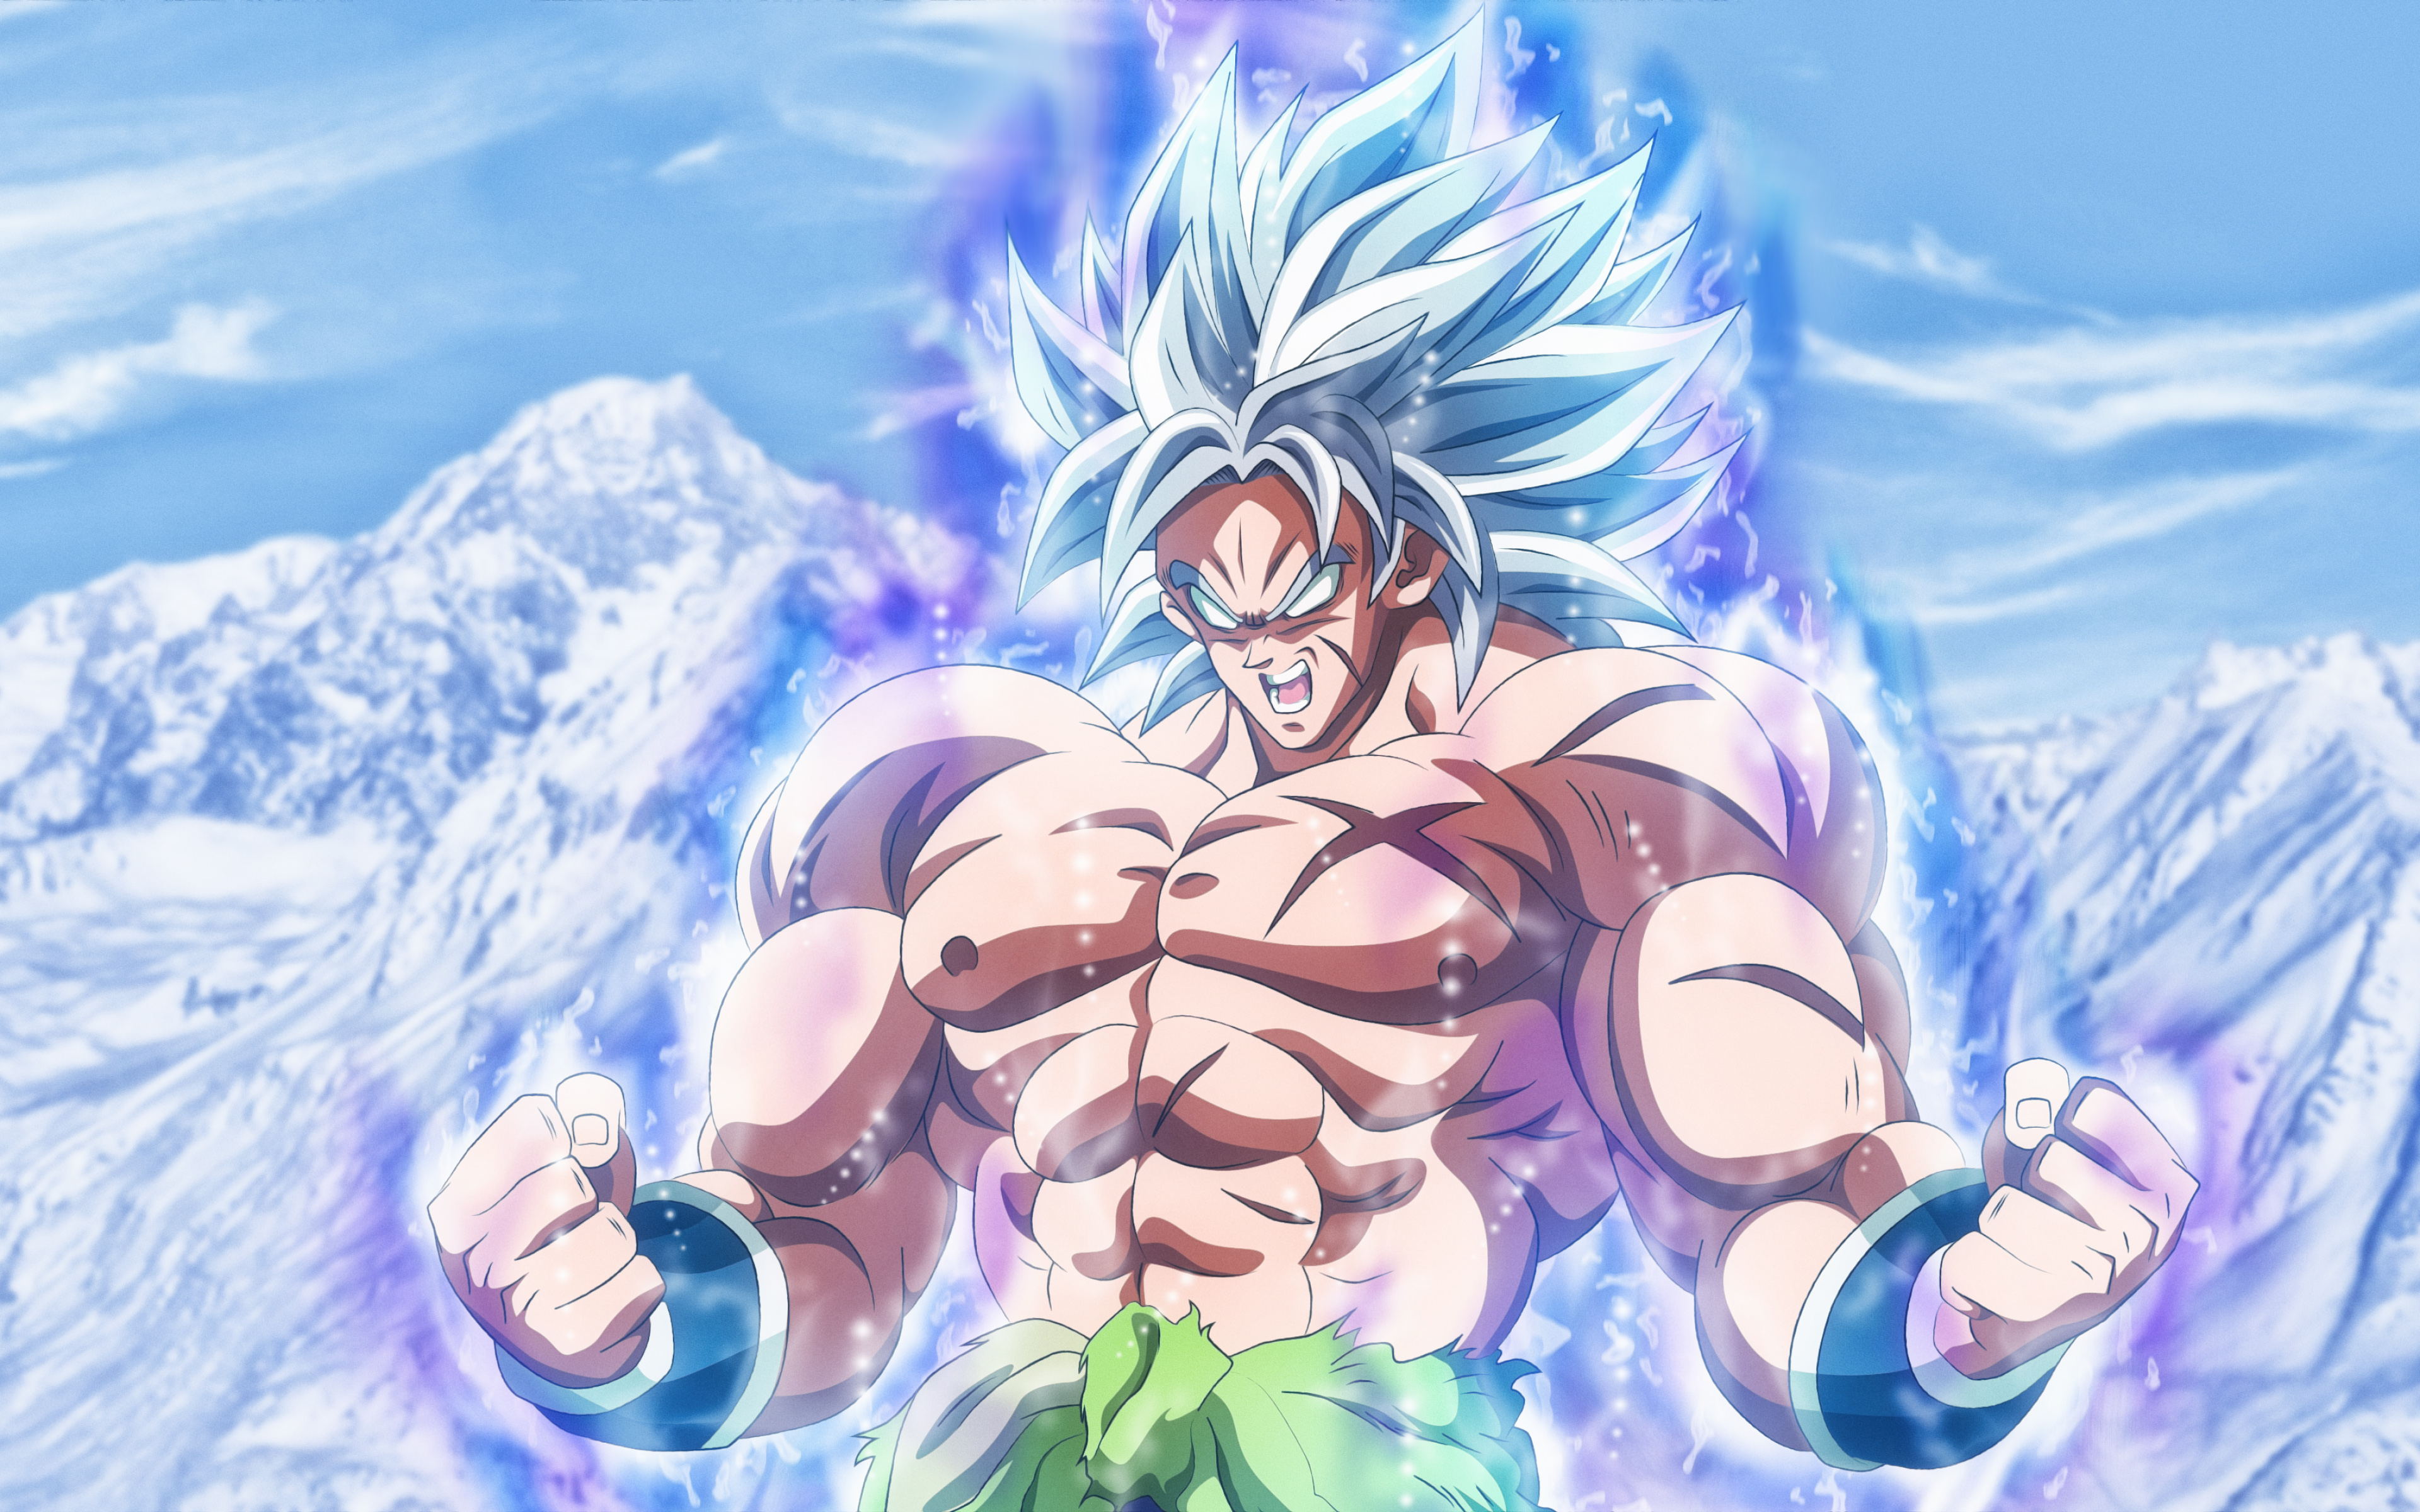 Download wallpaper Broly, 4k, mountains, Dragon Ball, DBS, Dragon Ball Super for desktop with resolution 3840x2400. High Quality HD picture wallpaper